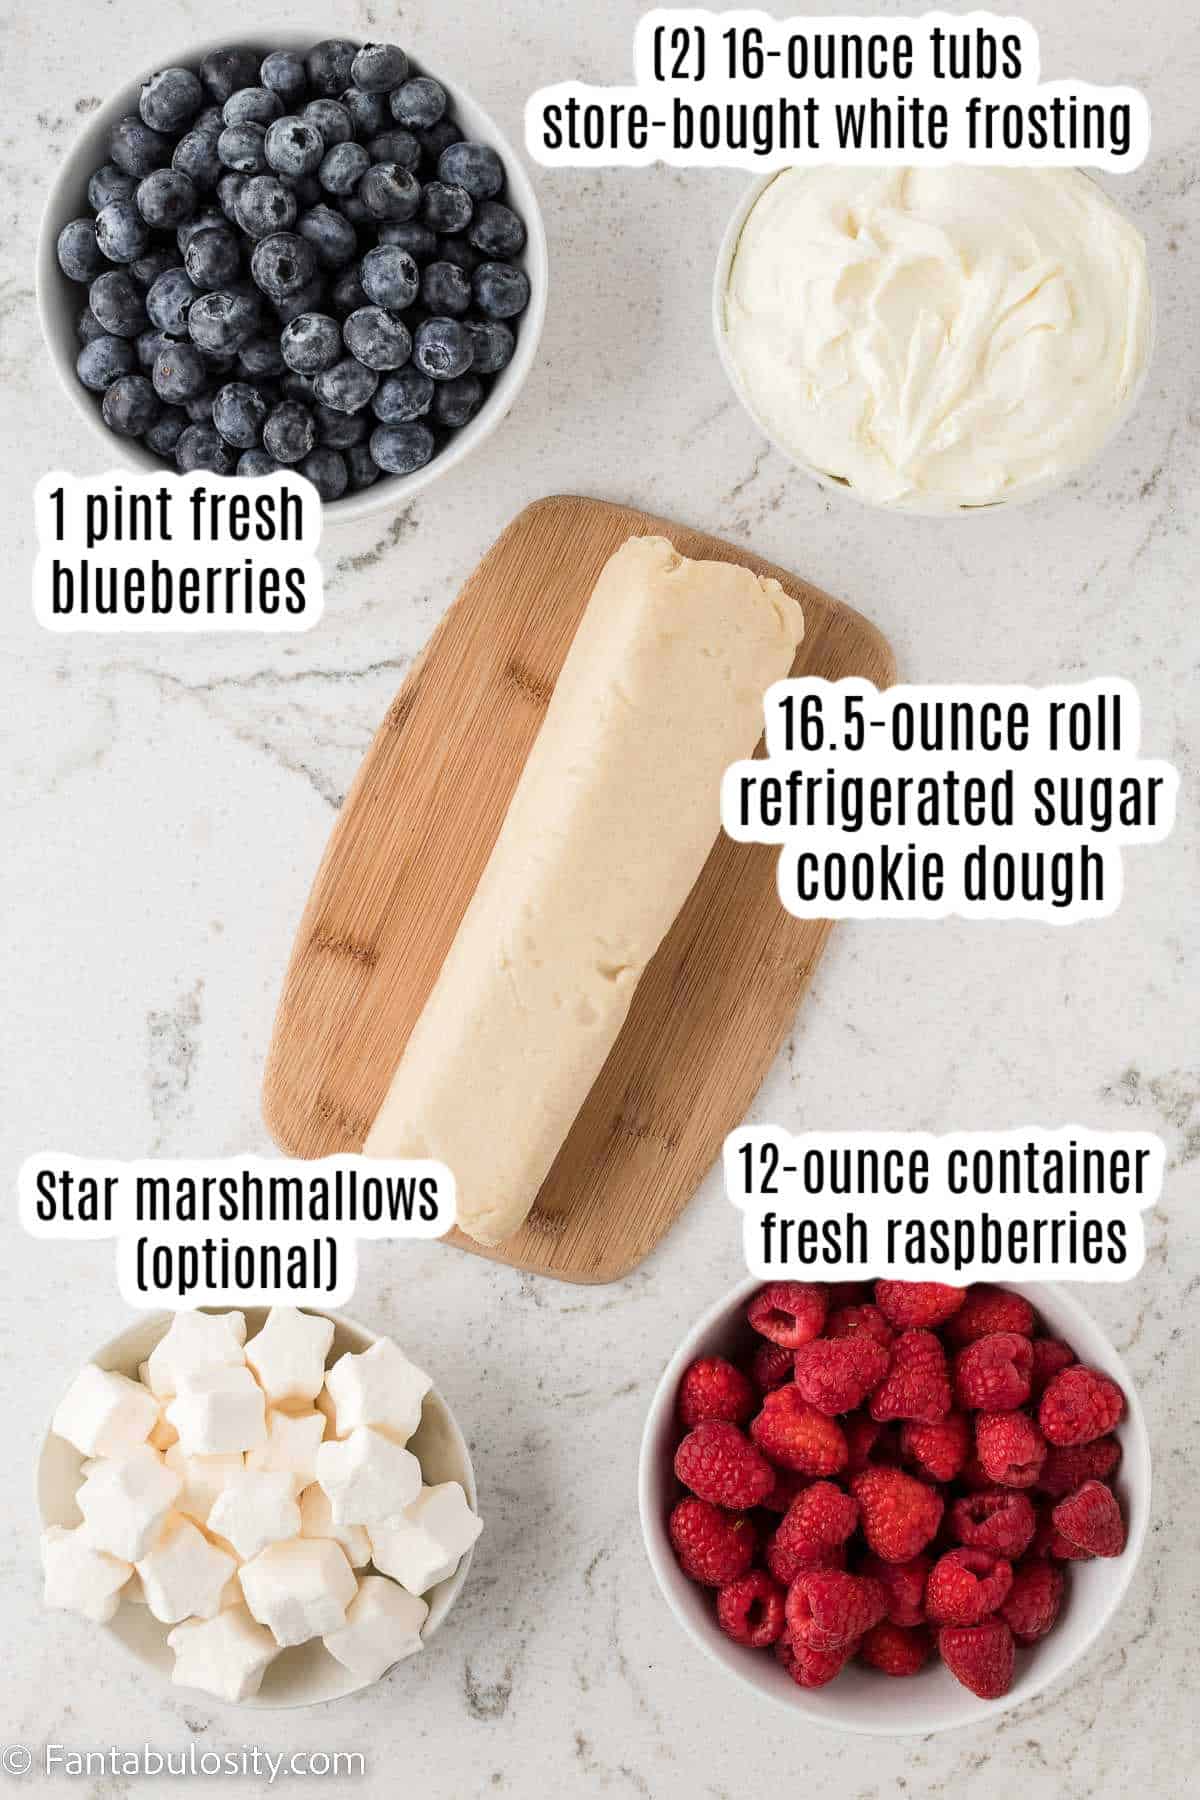 Ingredients for American flag fruit pizza, labeled on white marble.